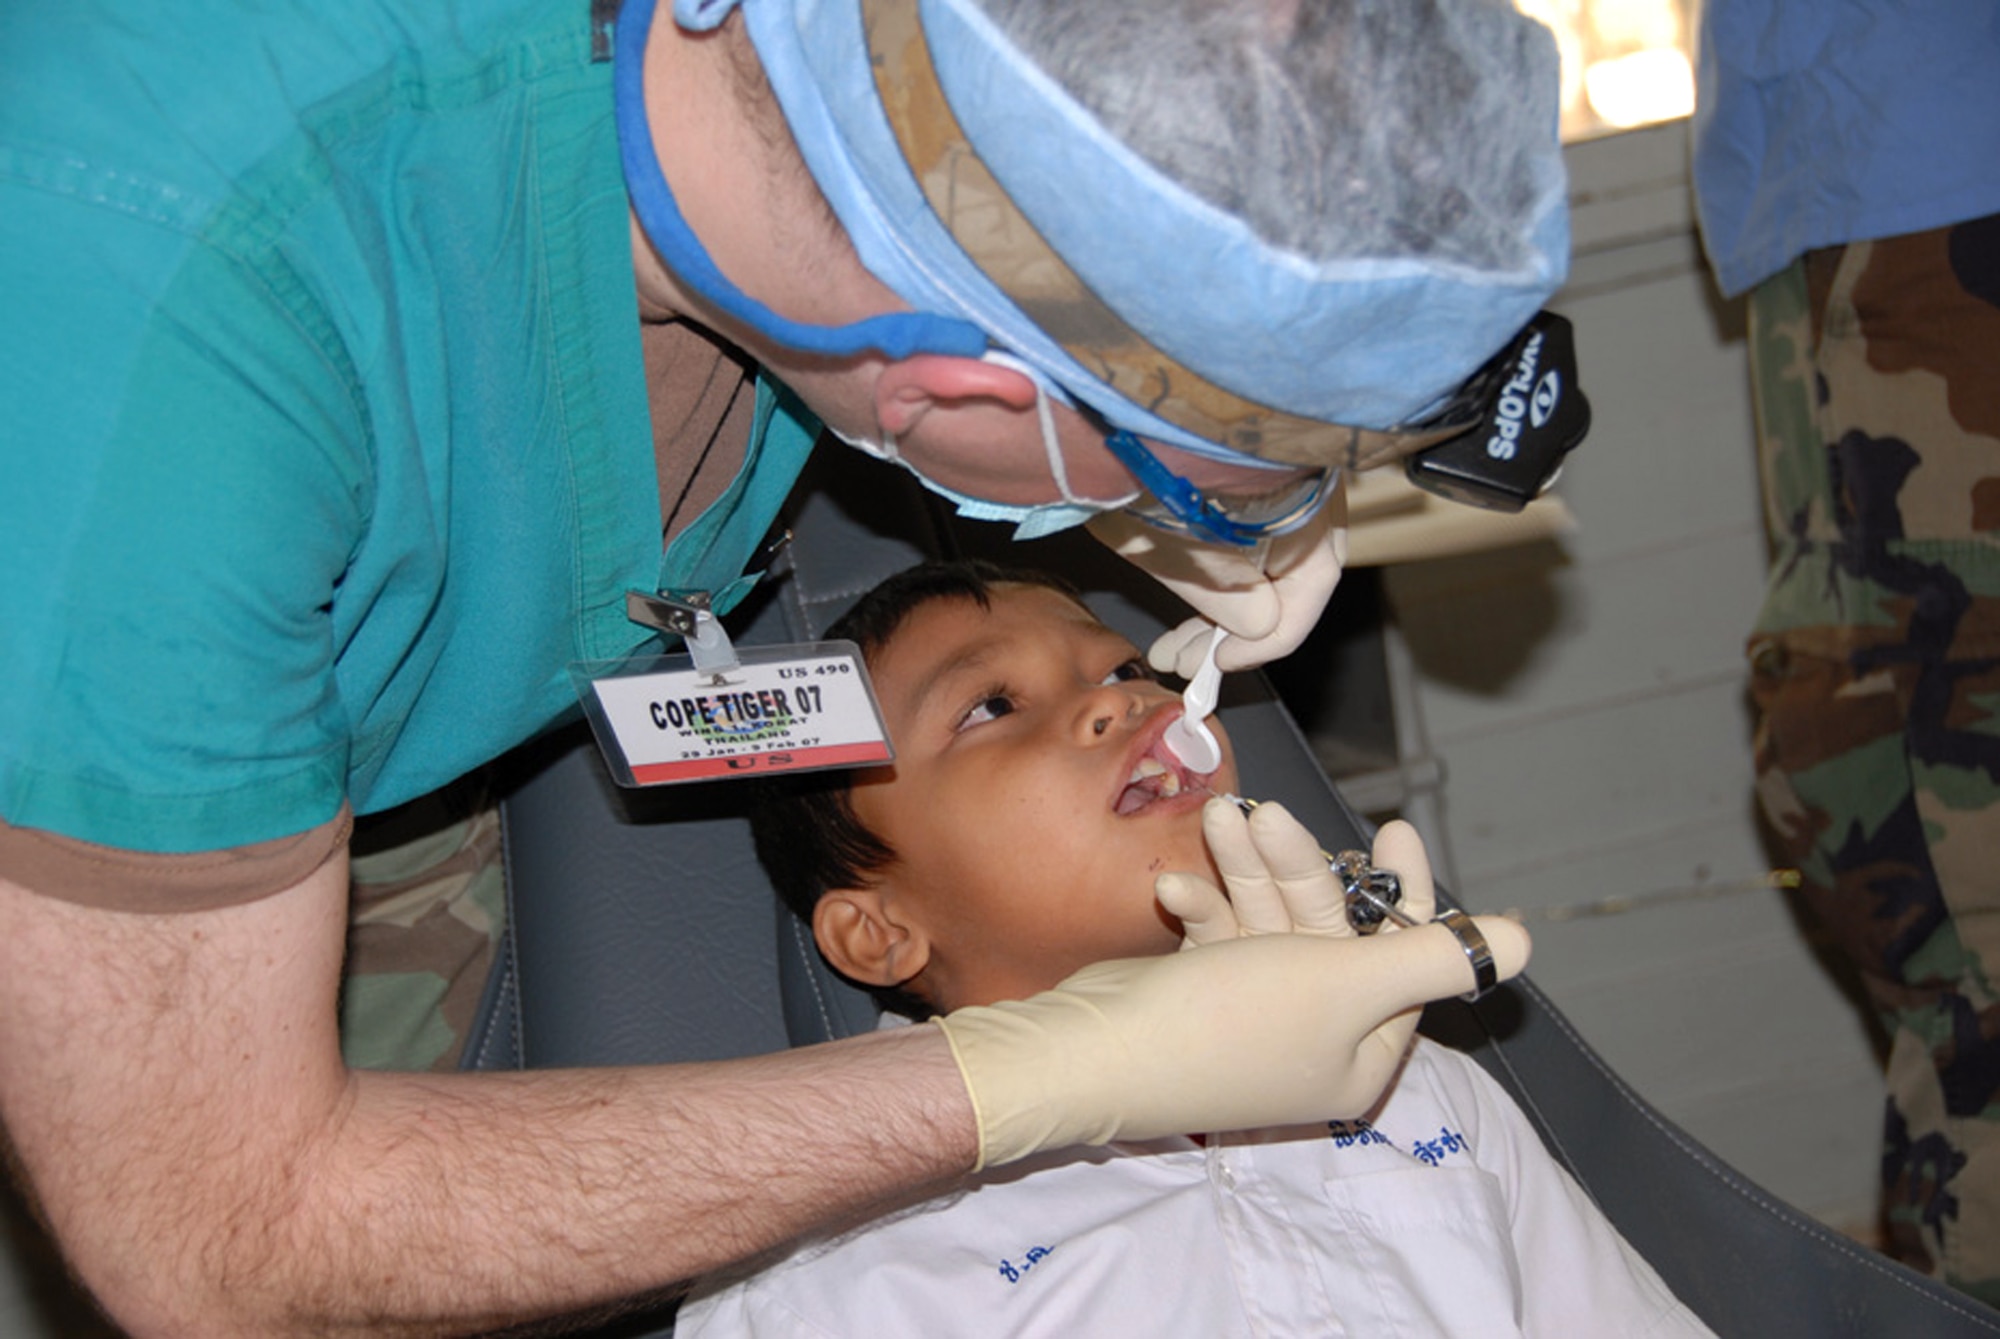 Capt. Alan Neal performs a tooth extraction on a student from the Ban Chaimongkon school Jan. 30 in Korat, Thailand. Military members from the United States, Thailand and Republic of Singapore took part in a humanitarian mission at the school as part of Exercise Cope Tiger 2007. Captain Neal is a dentist from the 35th Dental Squadron at Misawa Air Base, Japan. (U.S. Air Force photo/Staff Sgt. Betty Squatrito-Martin) 
